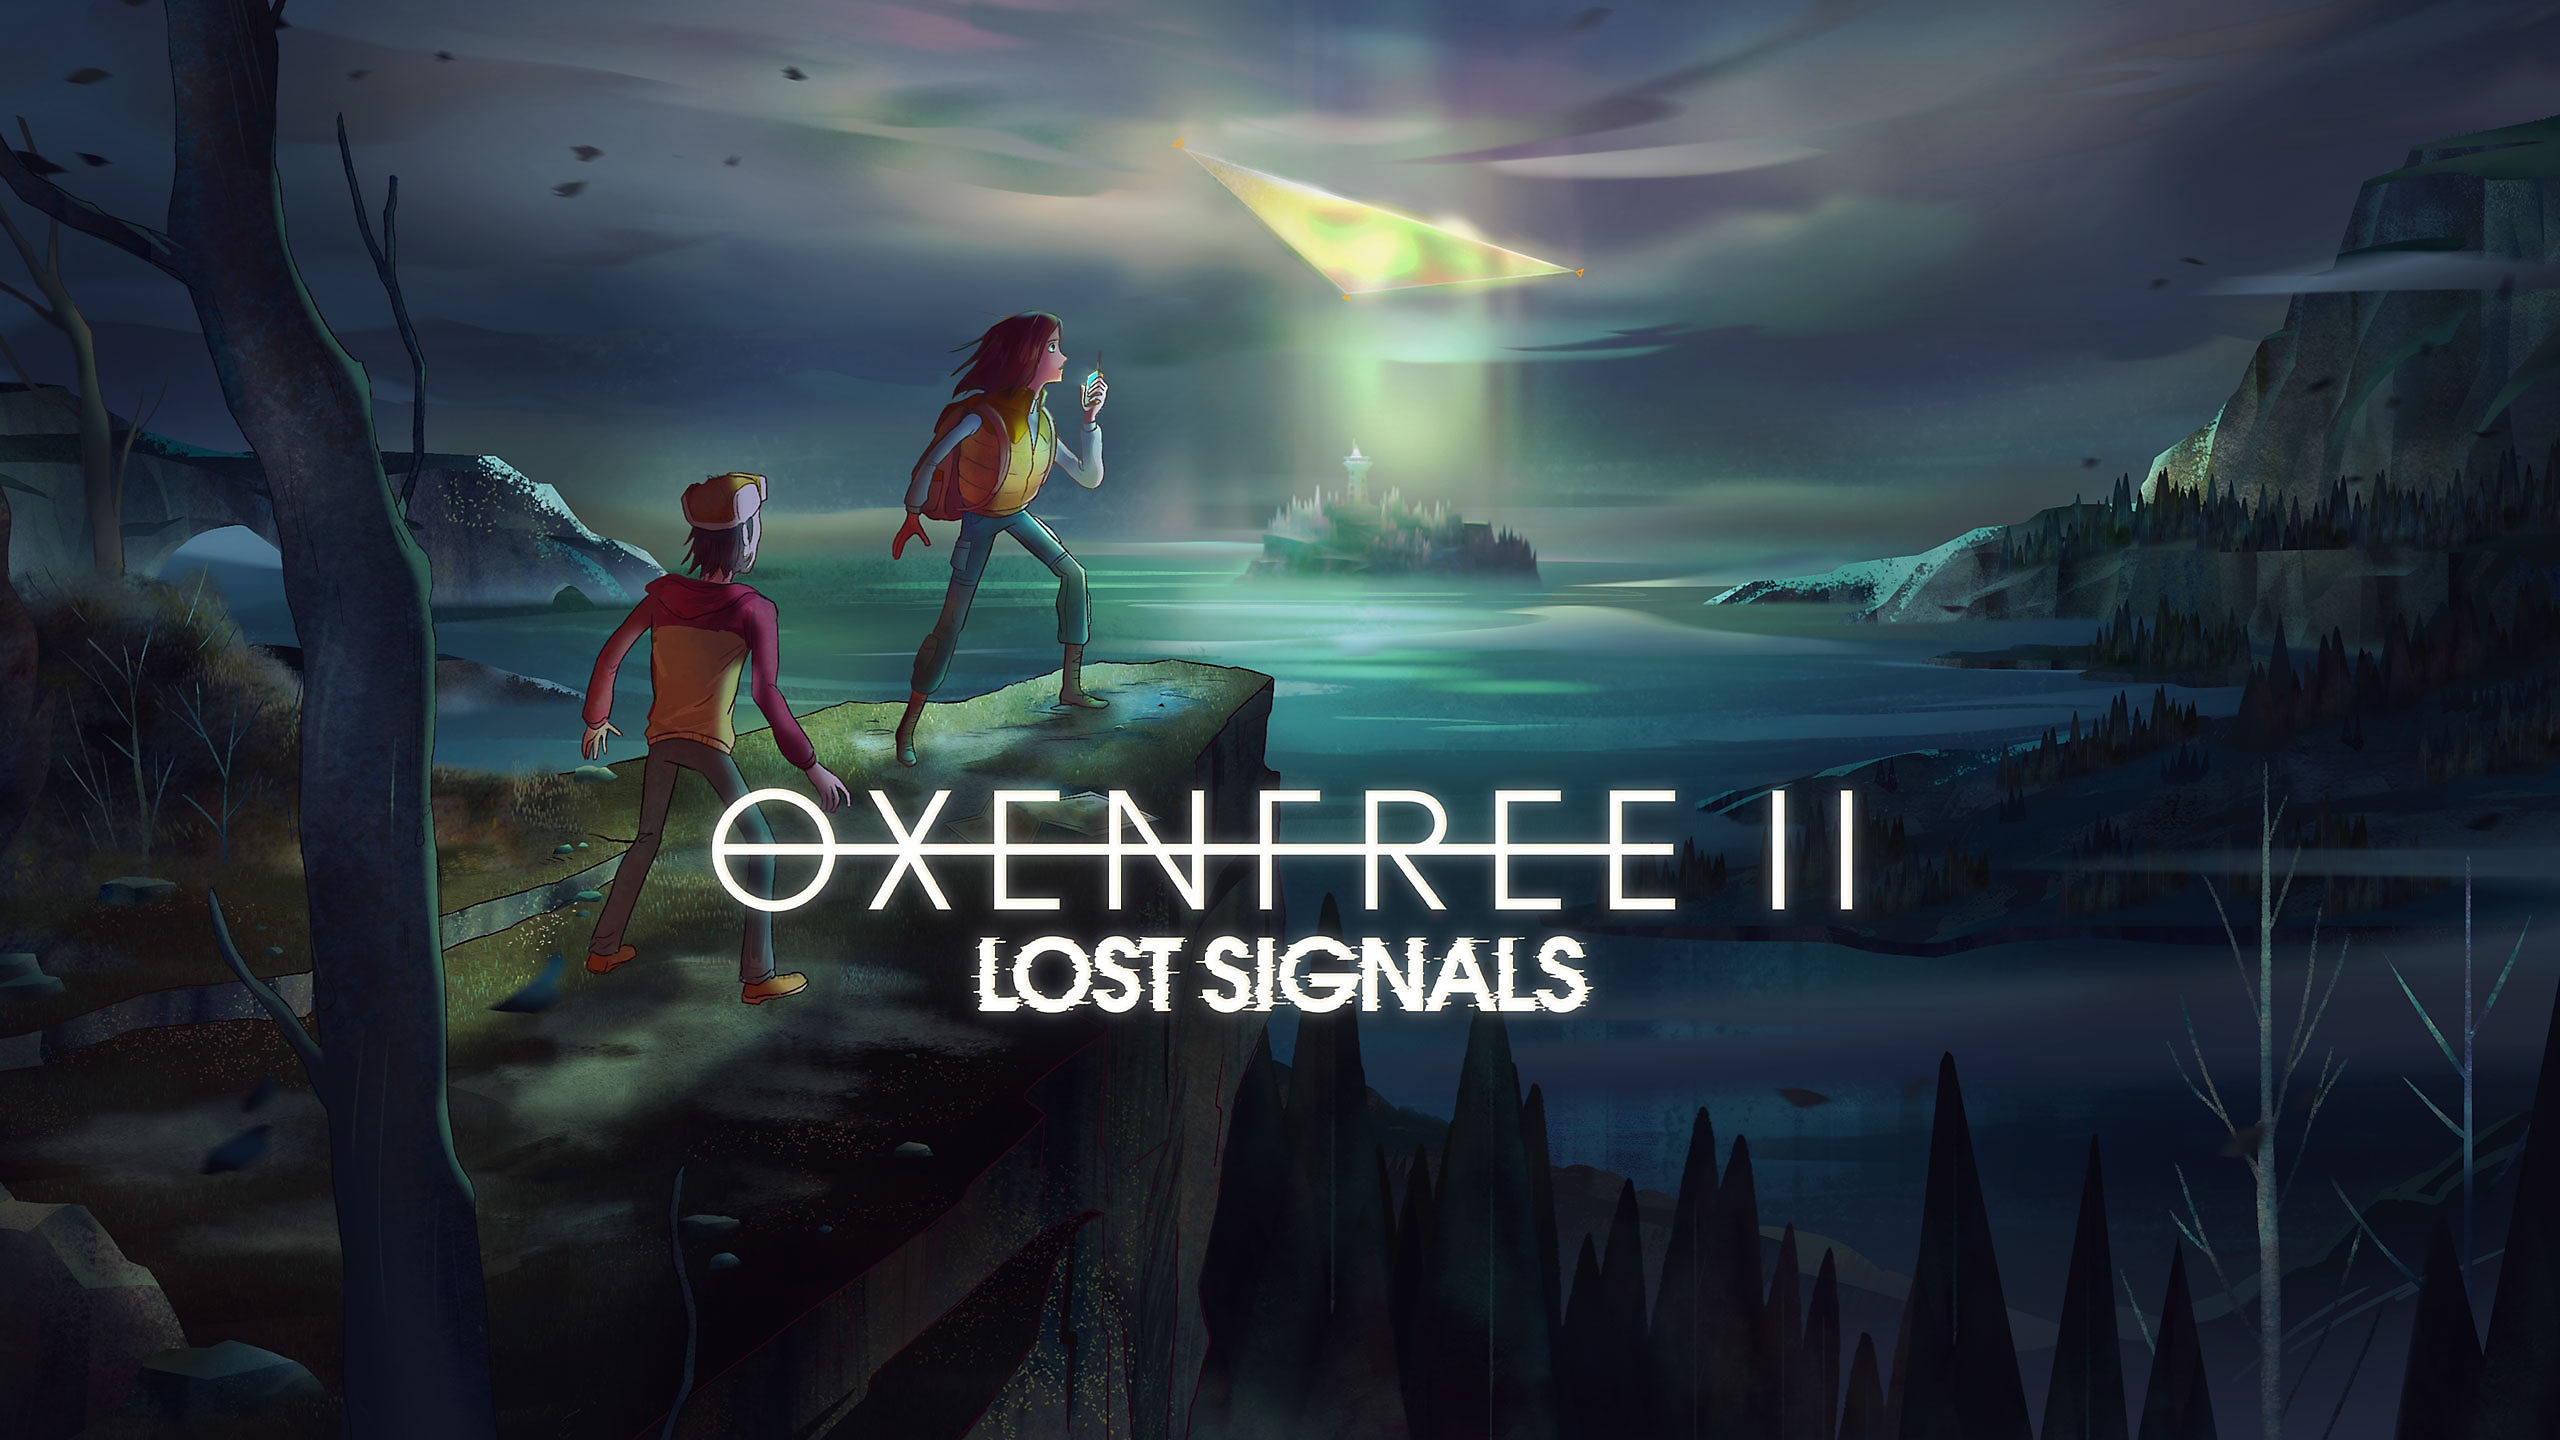 Oxenfree II: Lost Signals Games. PlayStation (US)